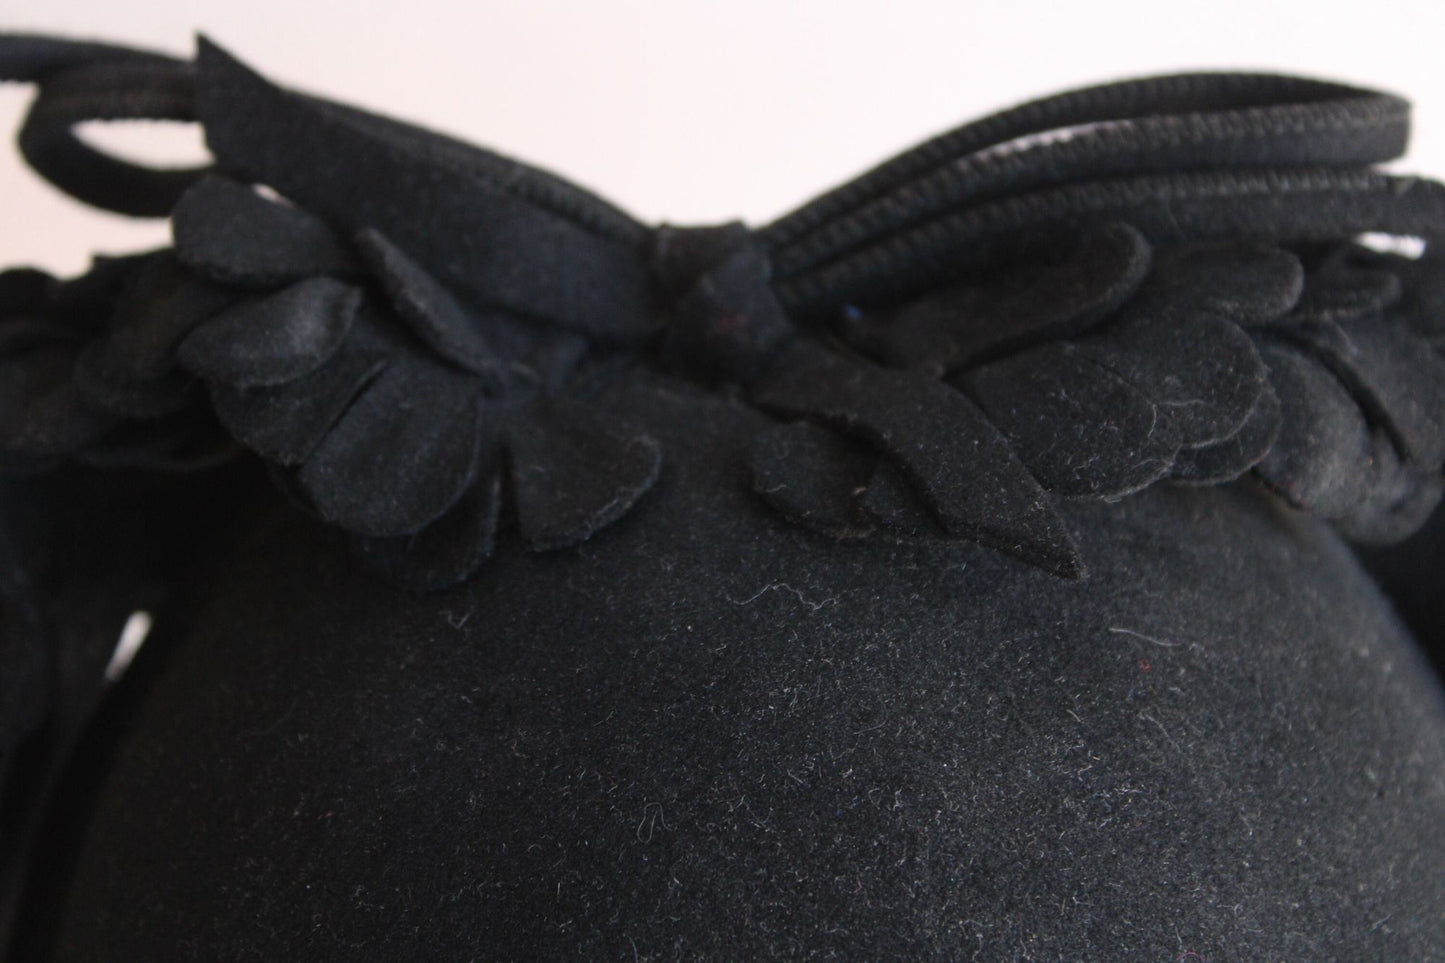 Vintage 1930s 1940s Black Wool Felt Hat with Faux Flowers and Bow